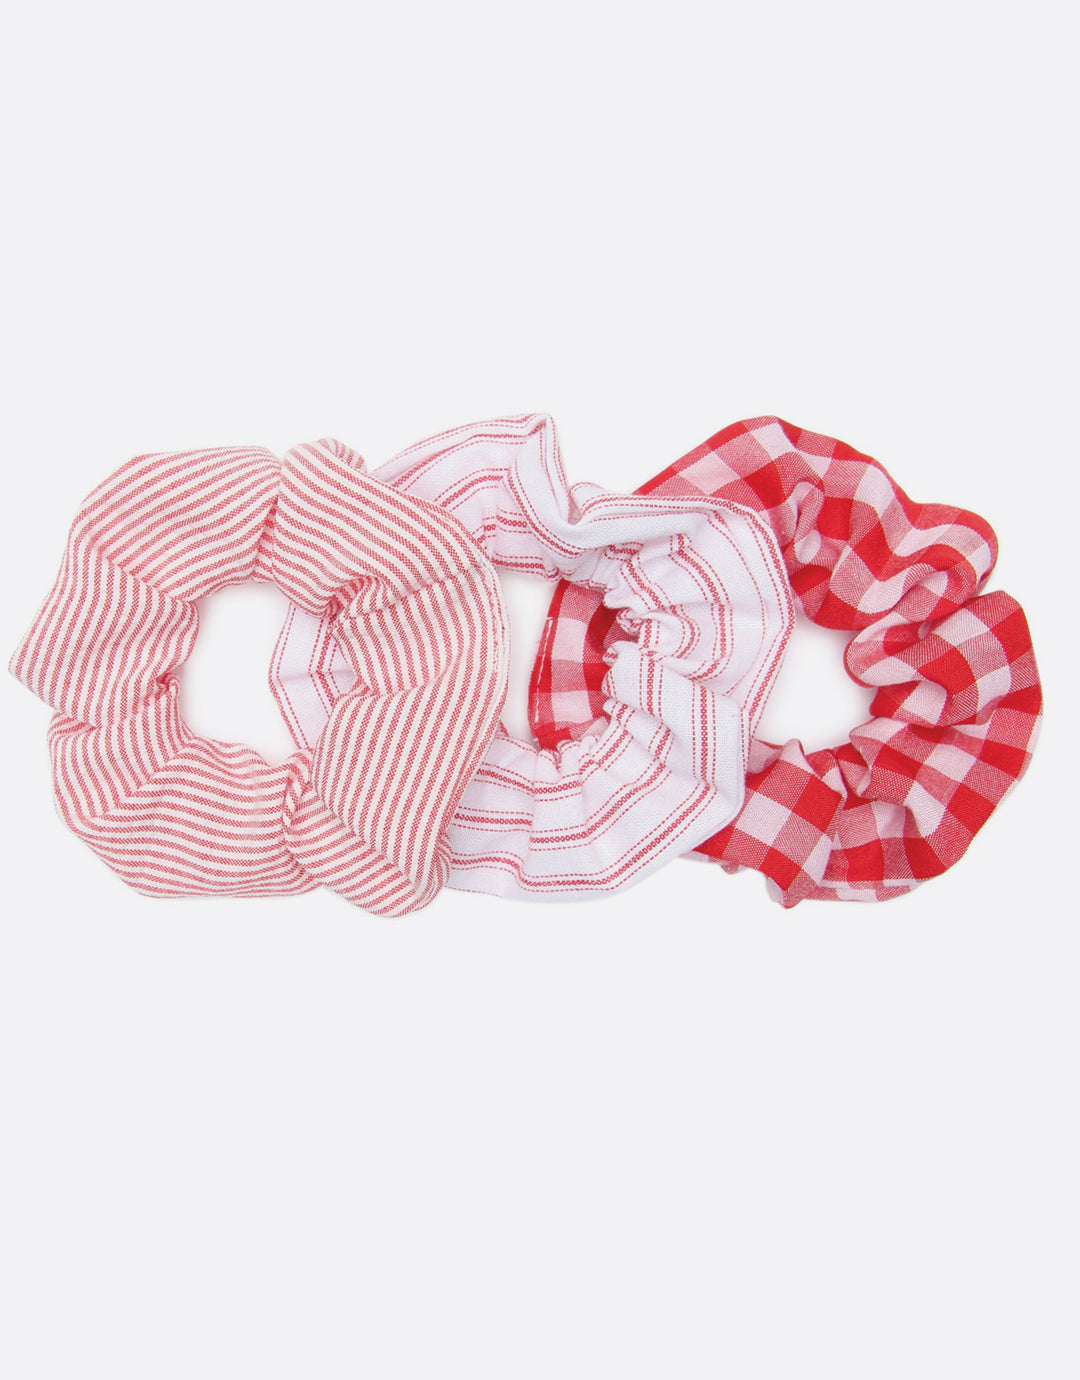 BANDED Women’s Premium Hair Accessories - French Gingham - 3 Pack Knit Scrunchies